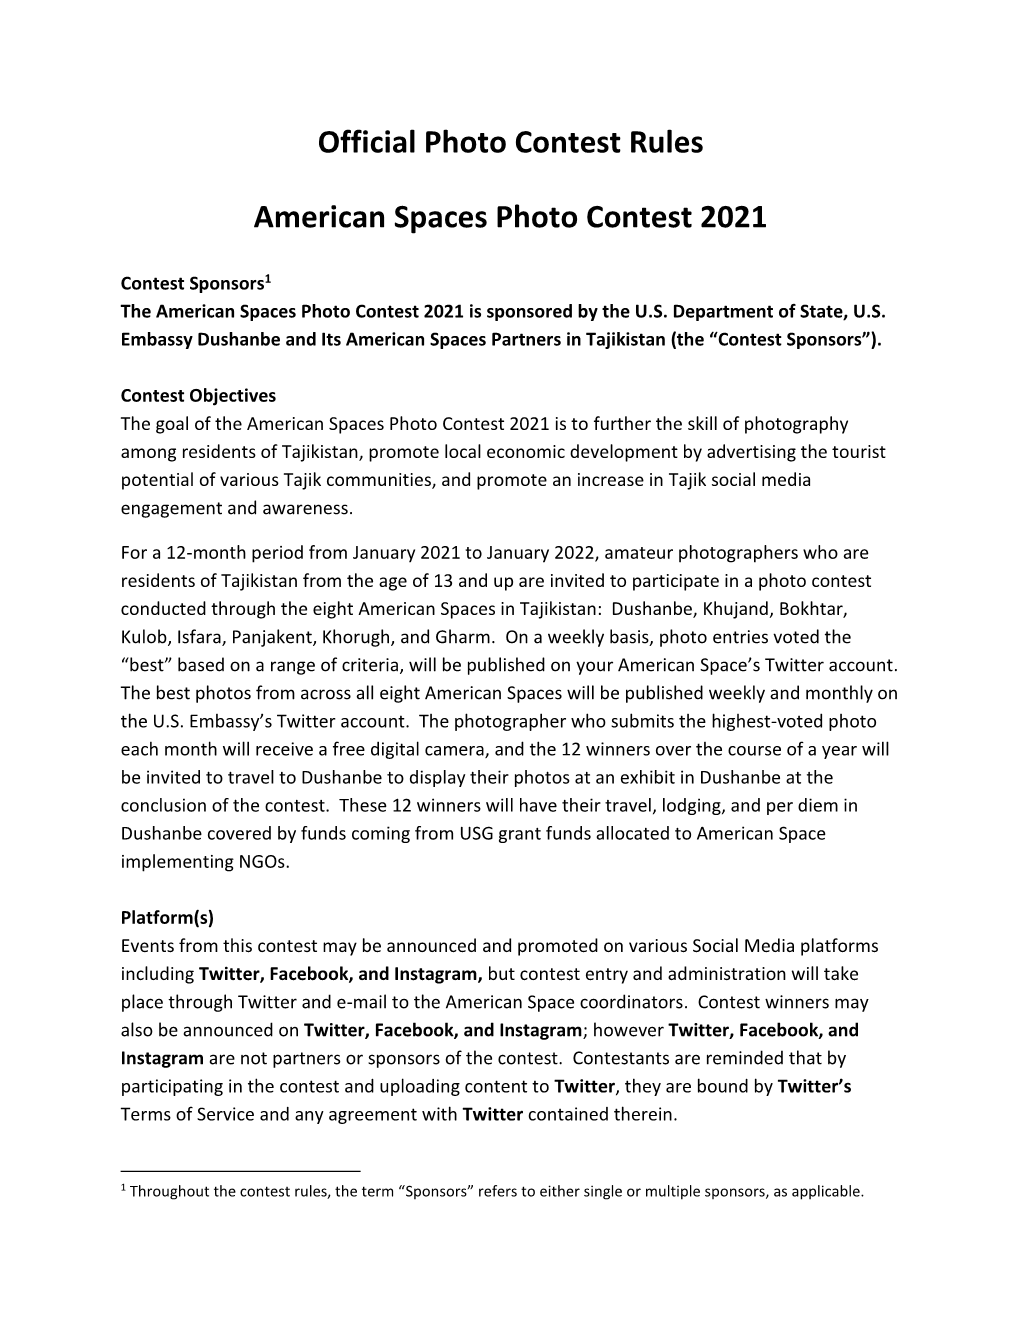 Official Photo Contest Rules American Spaces Photo Contest 2021